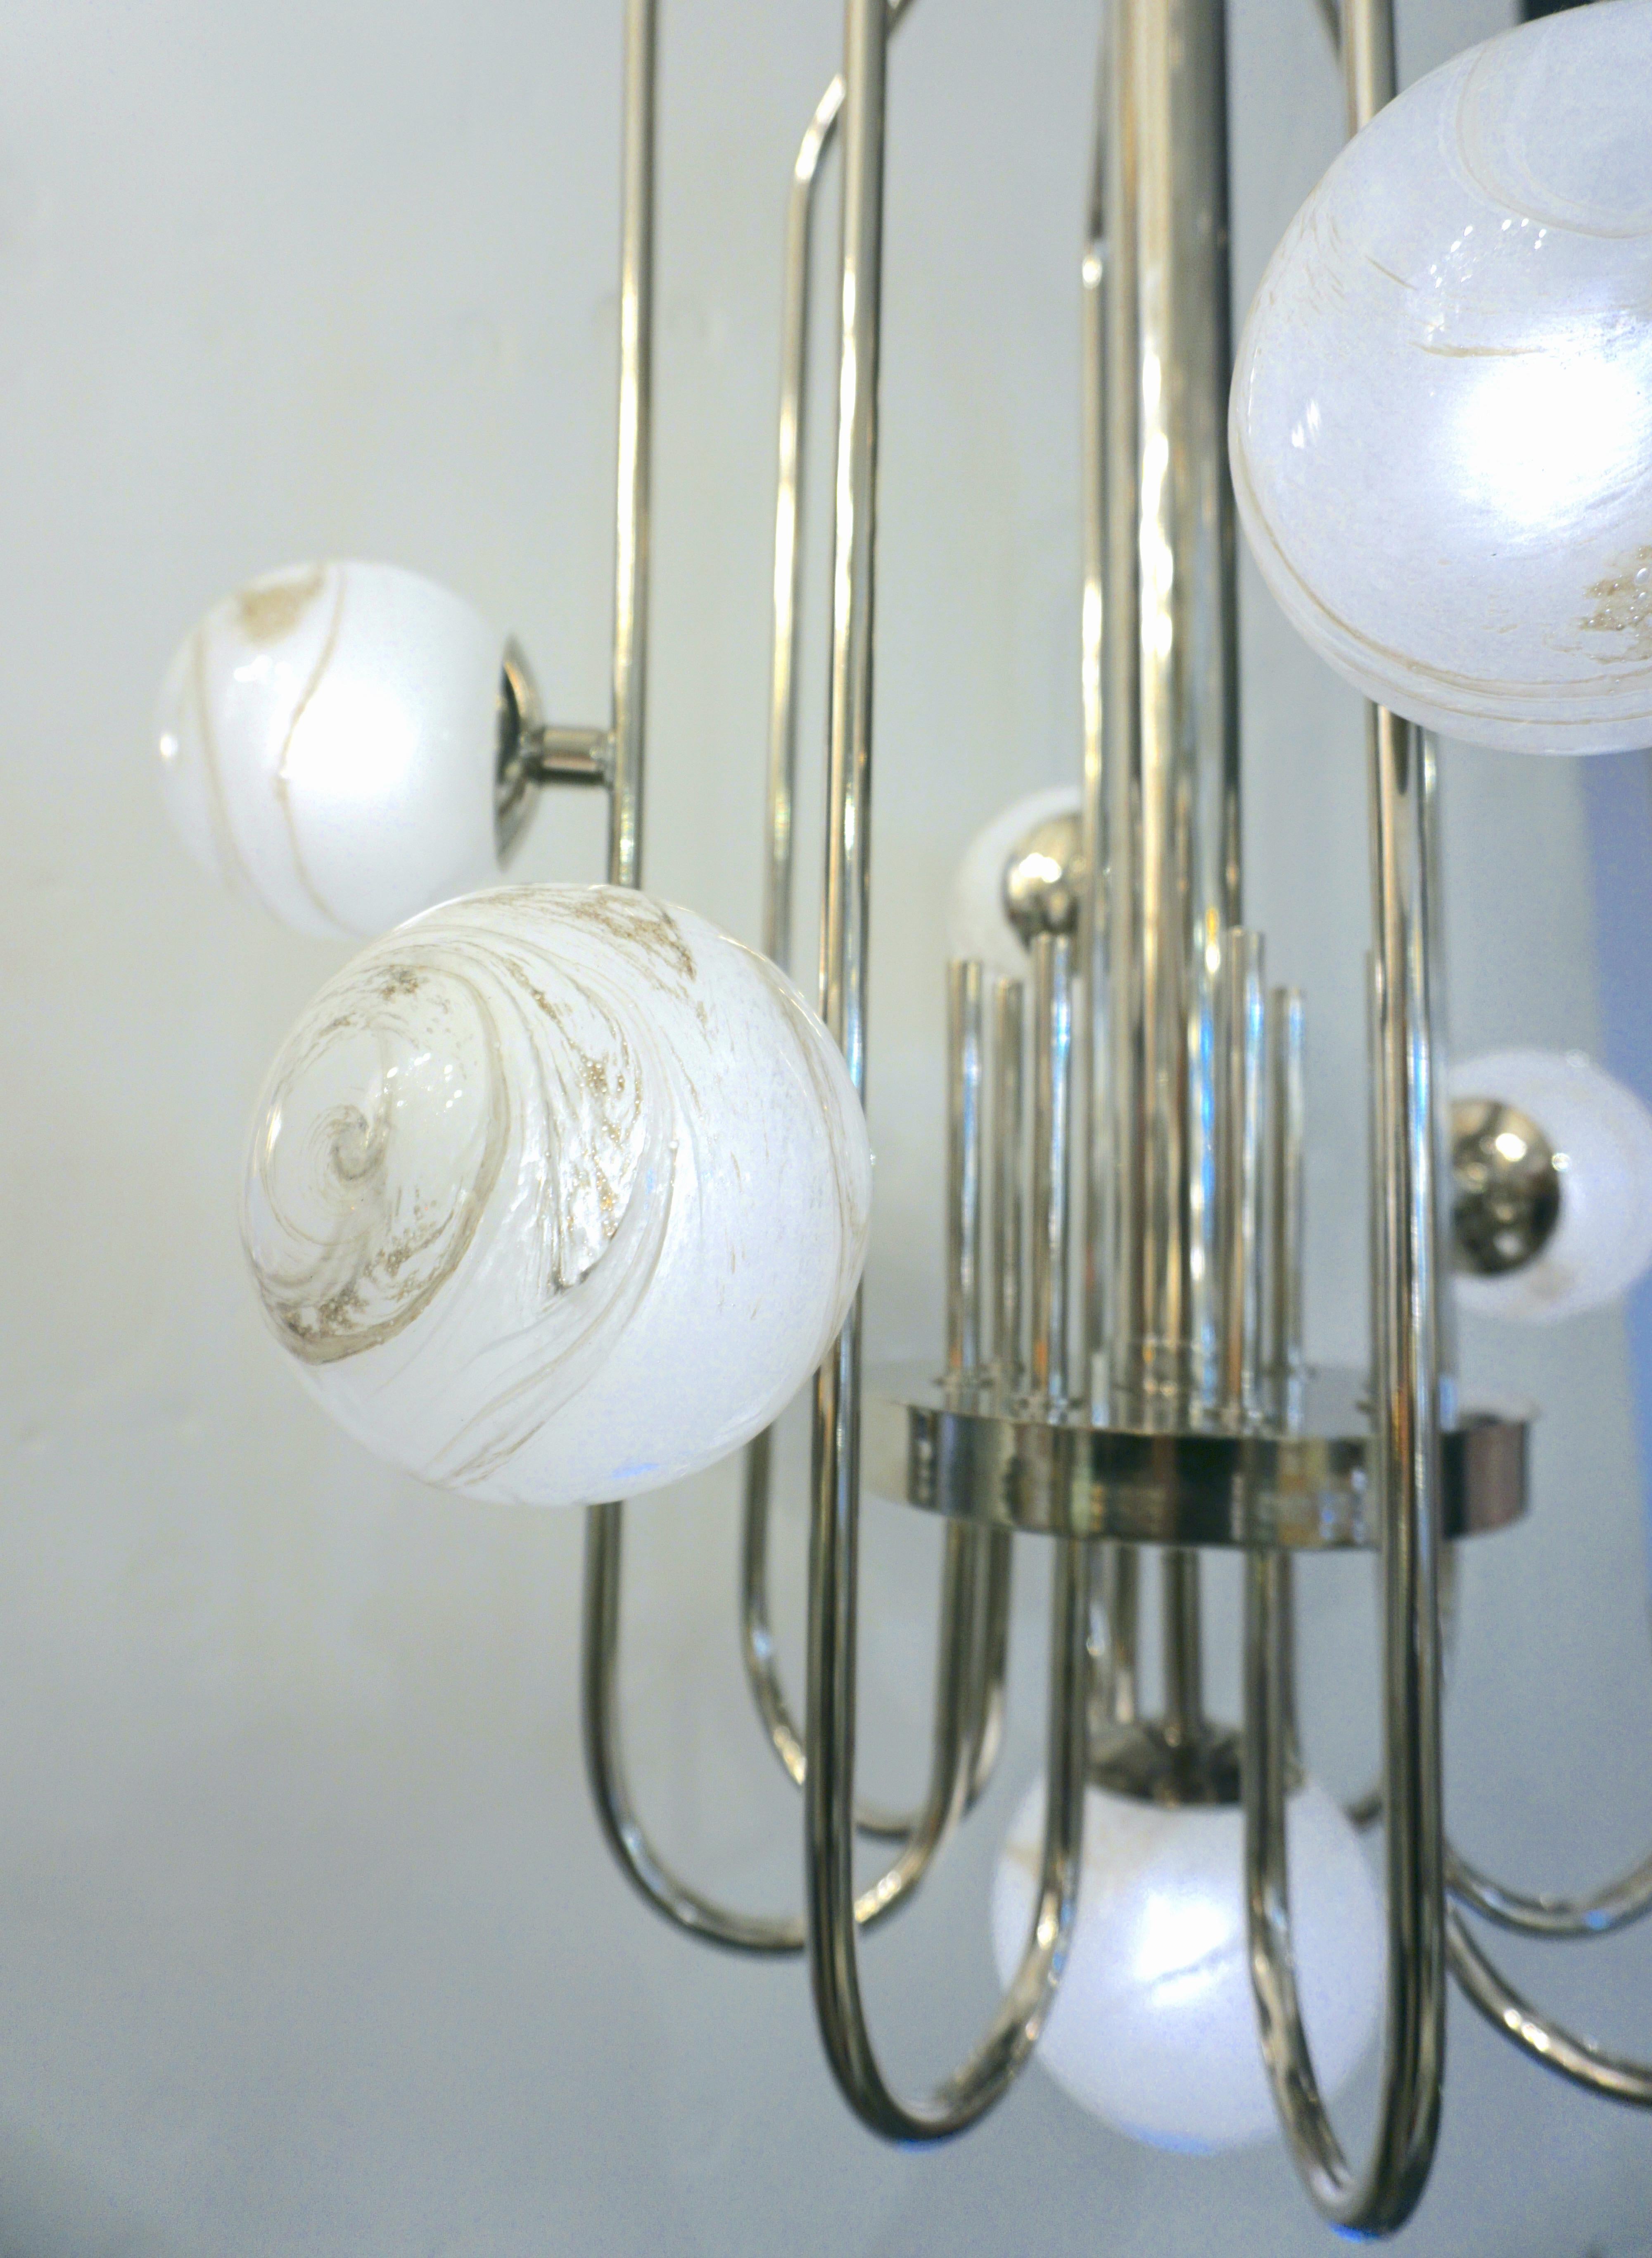 Hand-Crafted Bespoke Italian Alabaster White Murano Glass Nickel Curved Globe Chandelier For Sale